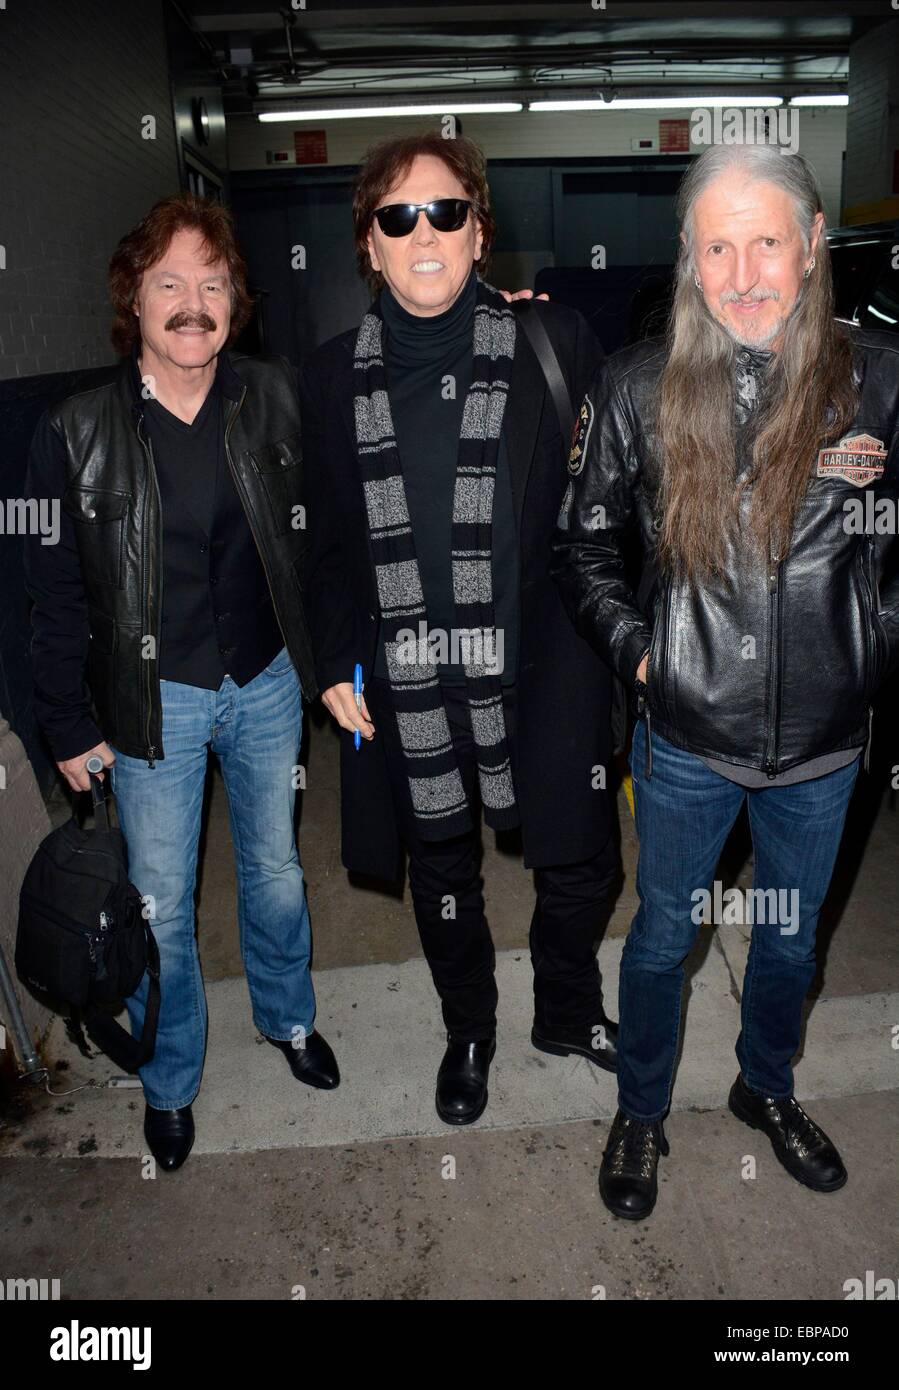 New York, NY, USA. 3rd Dec, 2014. Doobie Brothers: Tom Johnston, John McFee, Patrick Simmons out and about for Celebrity Candids - WED, New York, NY December 3, 2014. Credit:  Derek Storm/Everett Collection/Alamy Live News Stock Photo